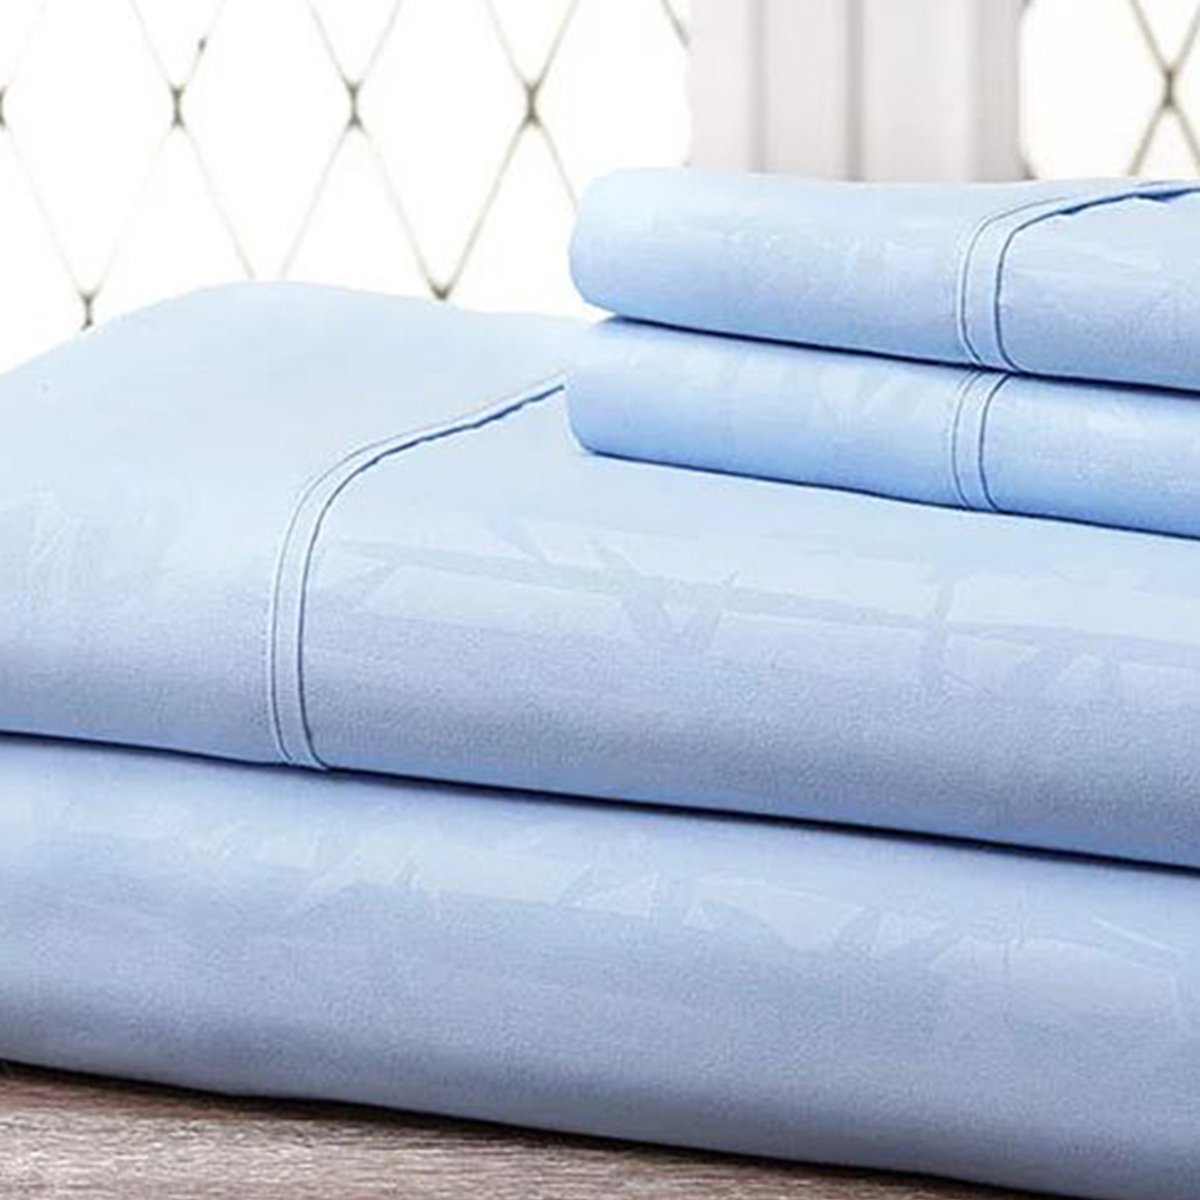 Hny-4pc-eb-lblu-q Super-soft 1600 Series Bamboo Embossed Bed Sheet, Light Blue - Queen, 4 Piece